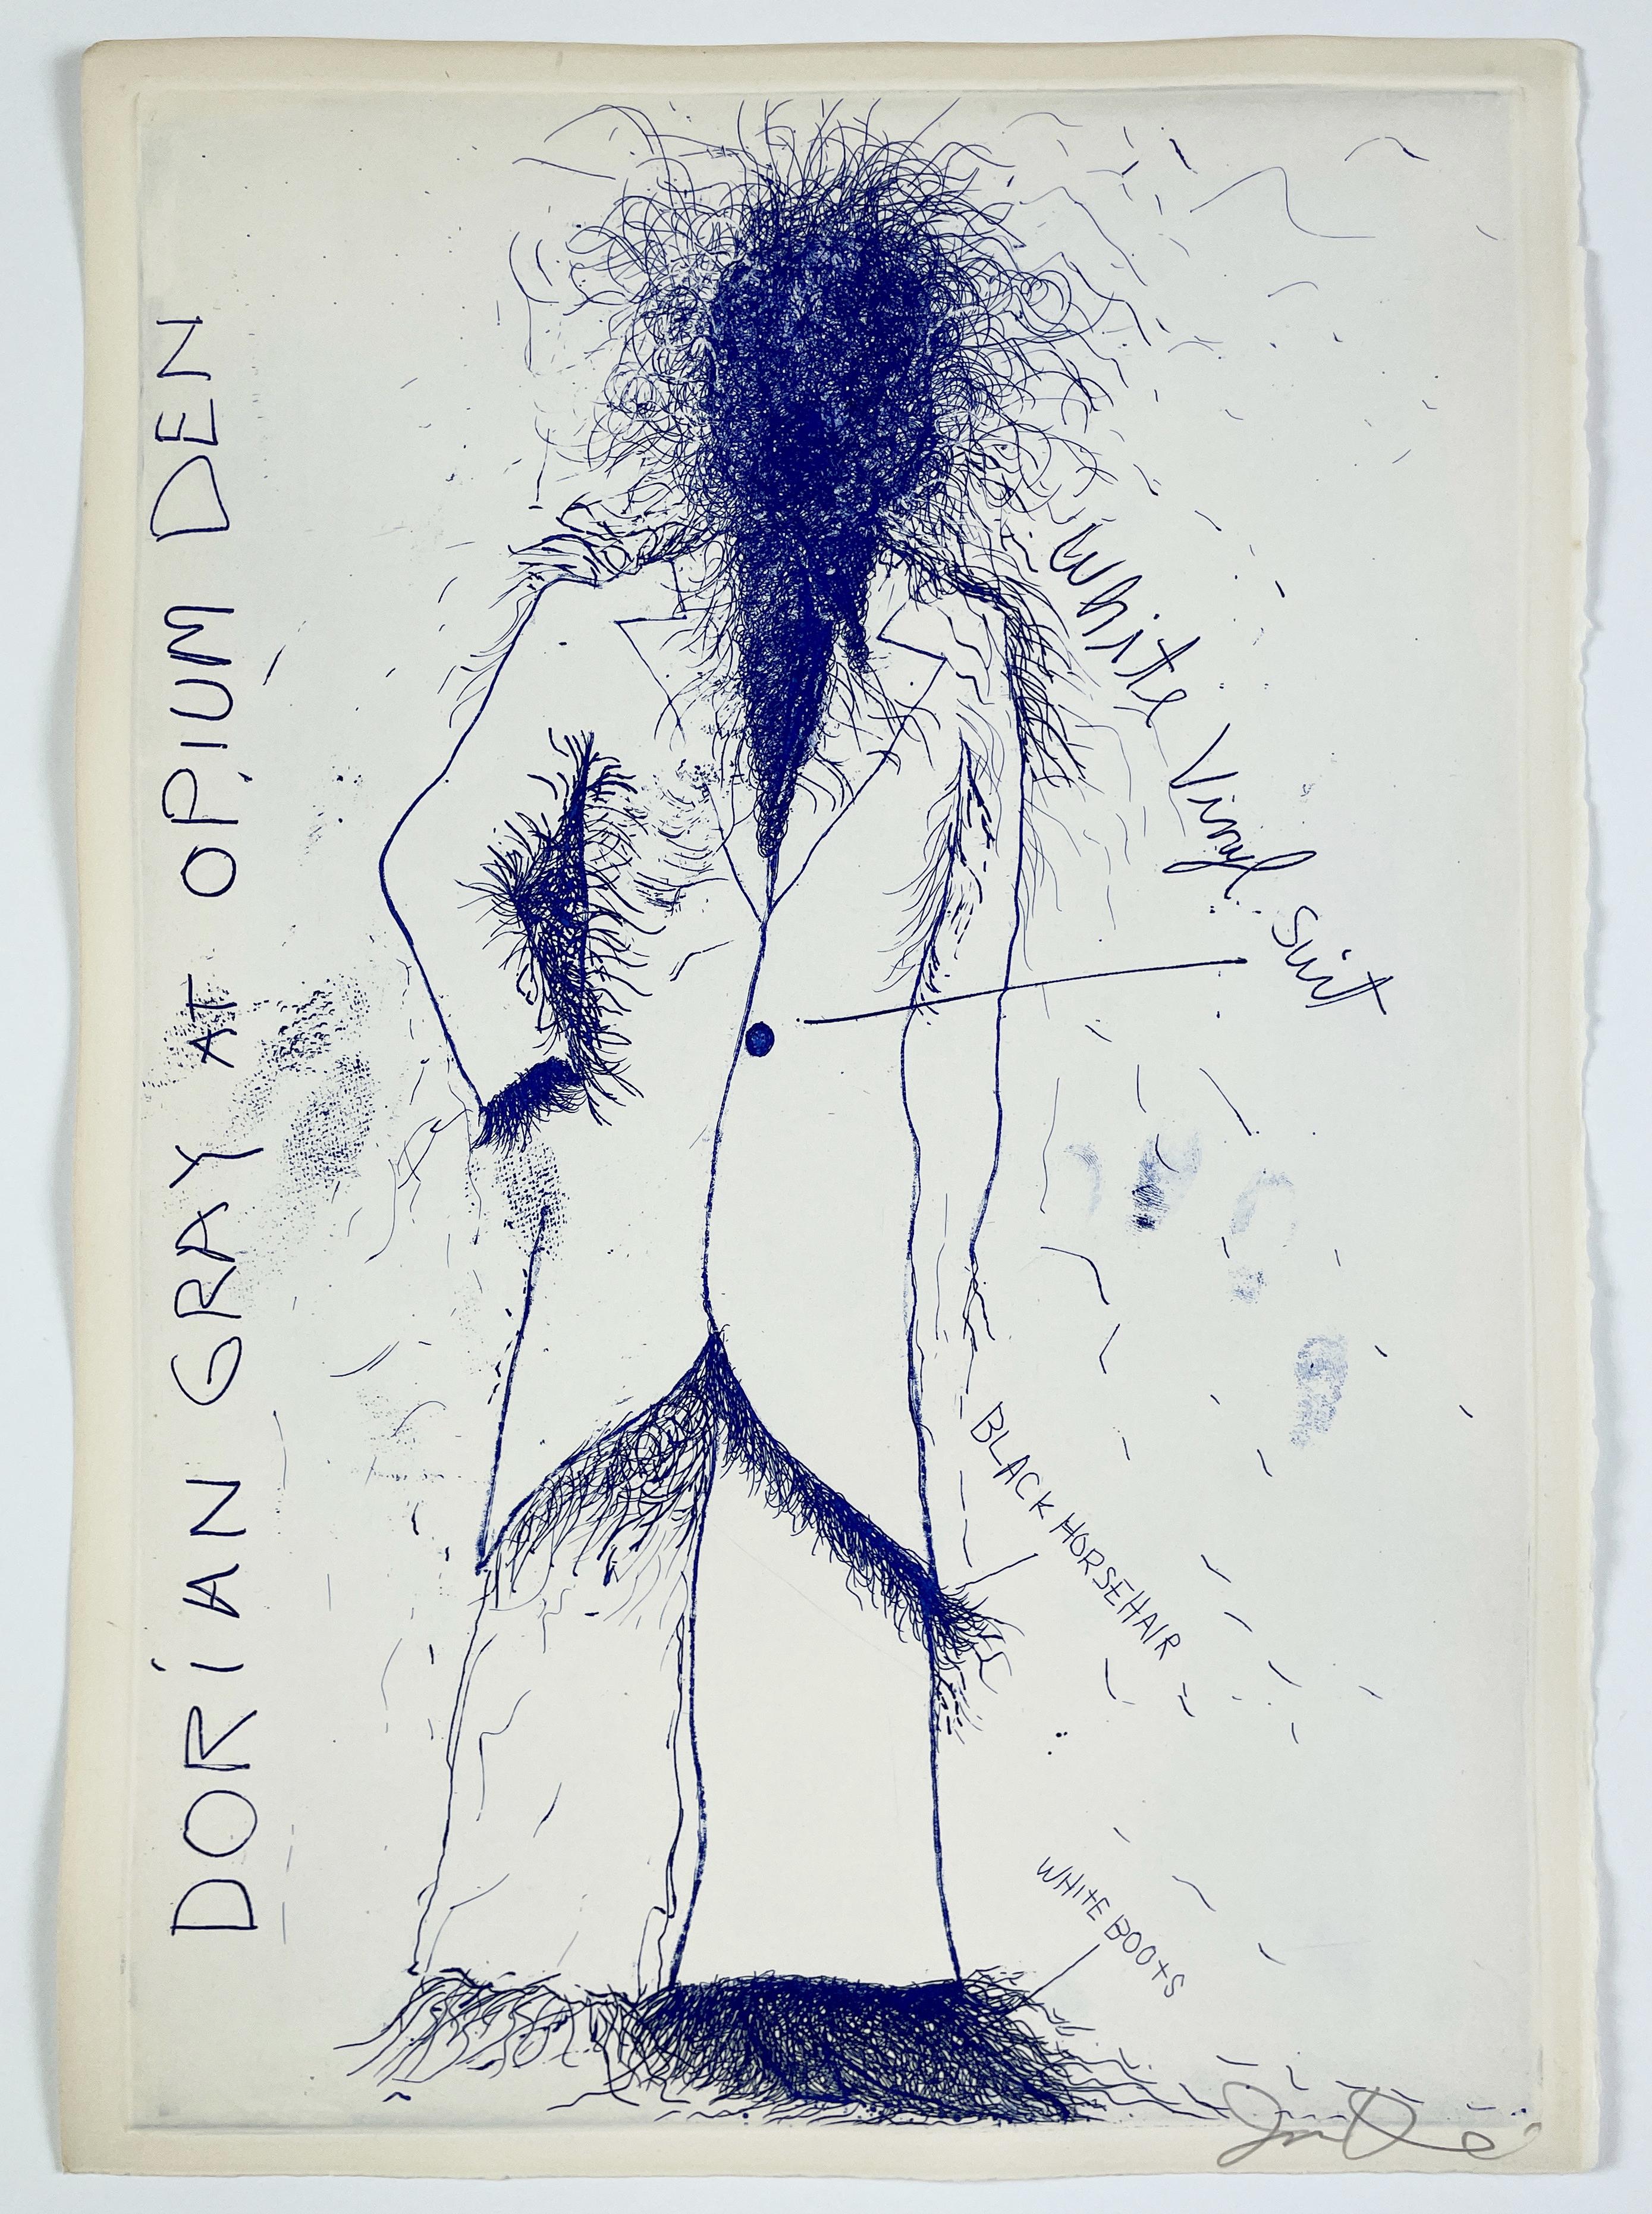 Jim Dine Figurative Print - Dorian Gray at Opium Den from "The Picture of Dorian Gray" surreal portrait